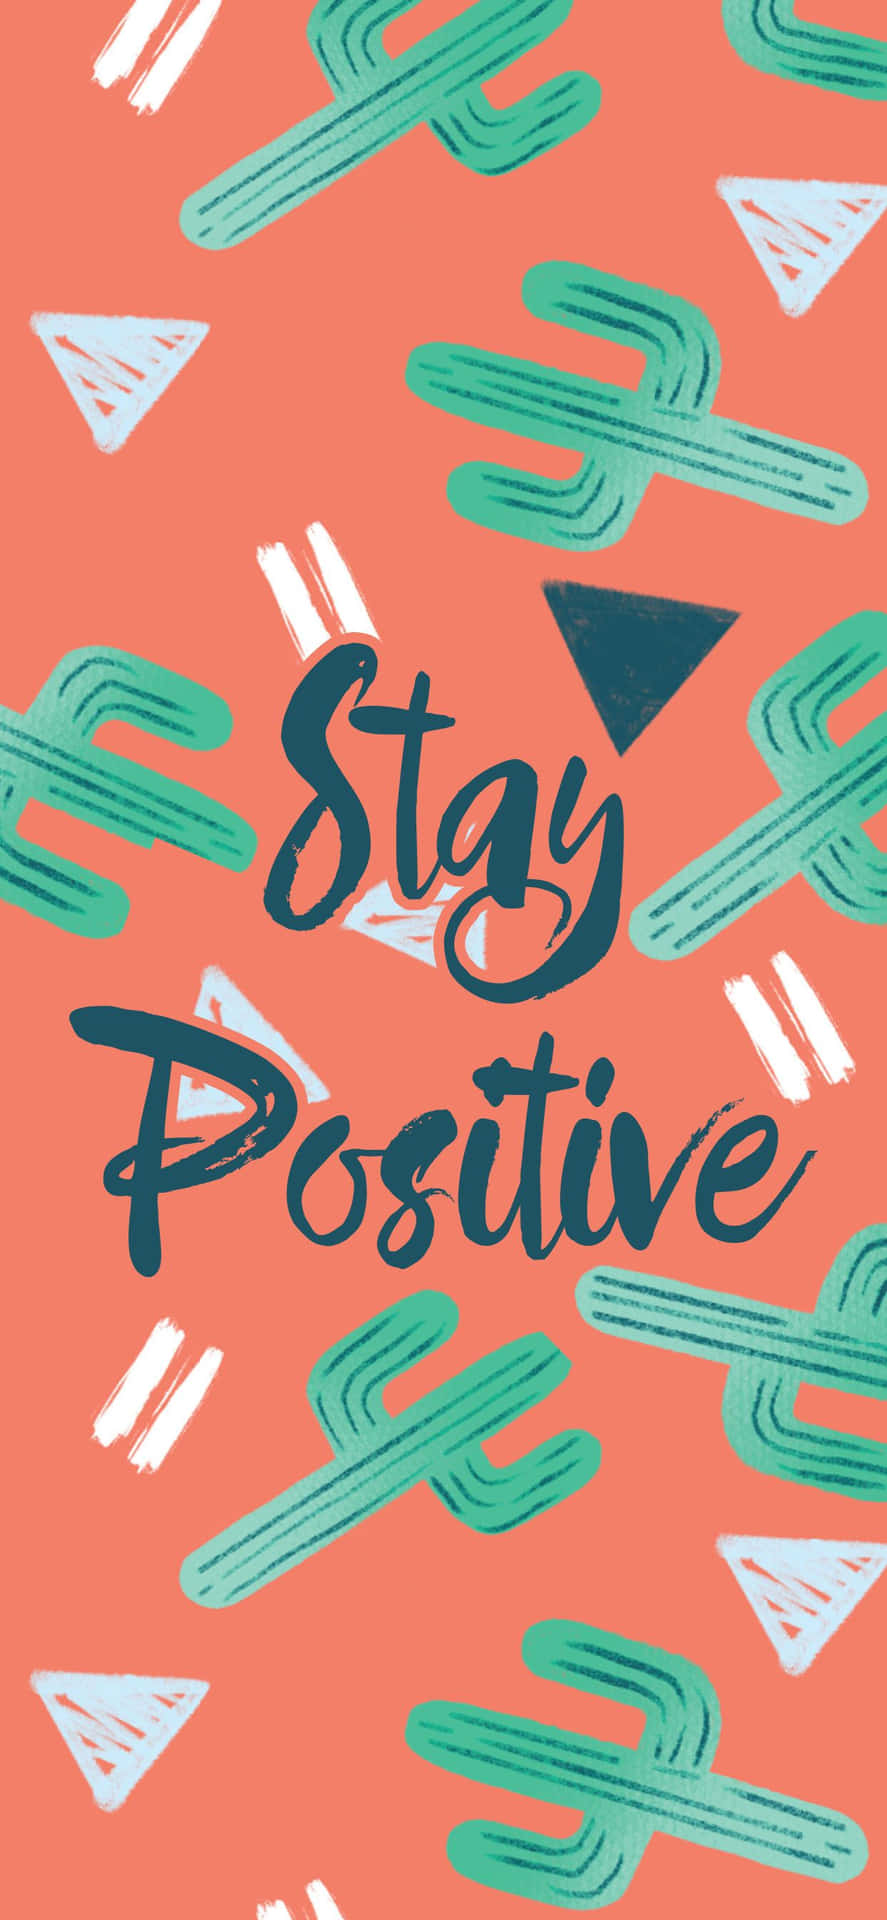 Stay positive and live life to the fullest. Wallpaper